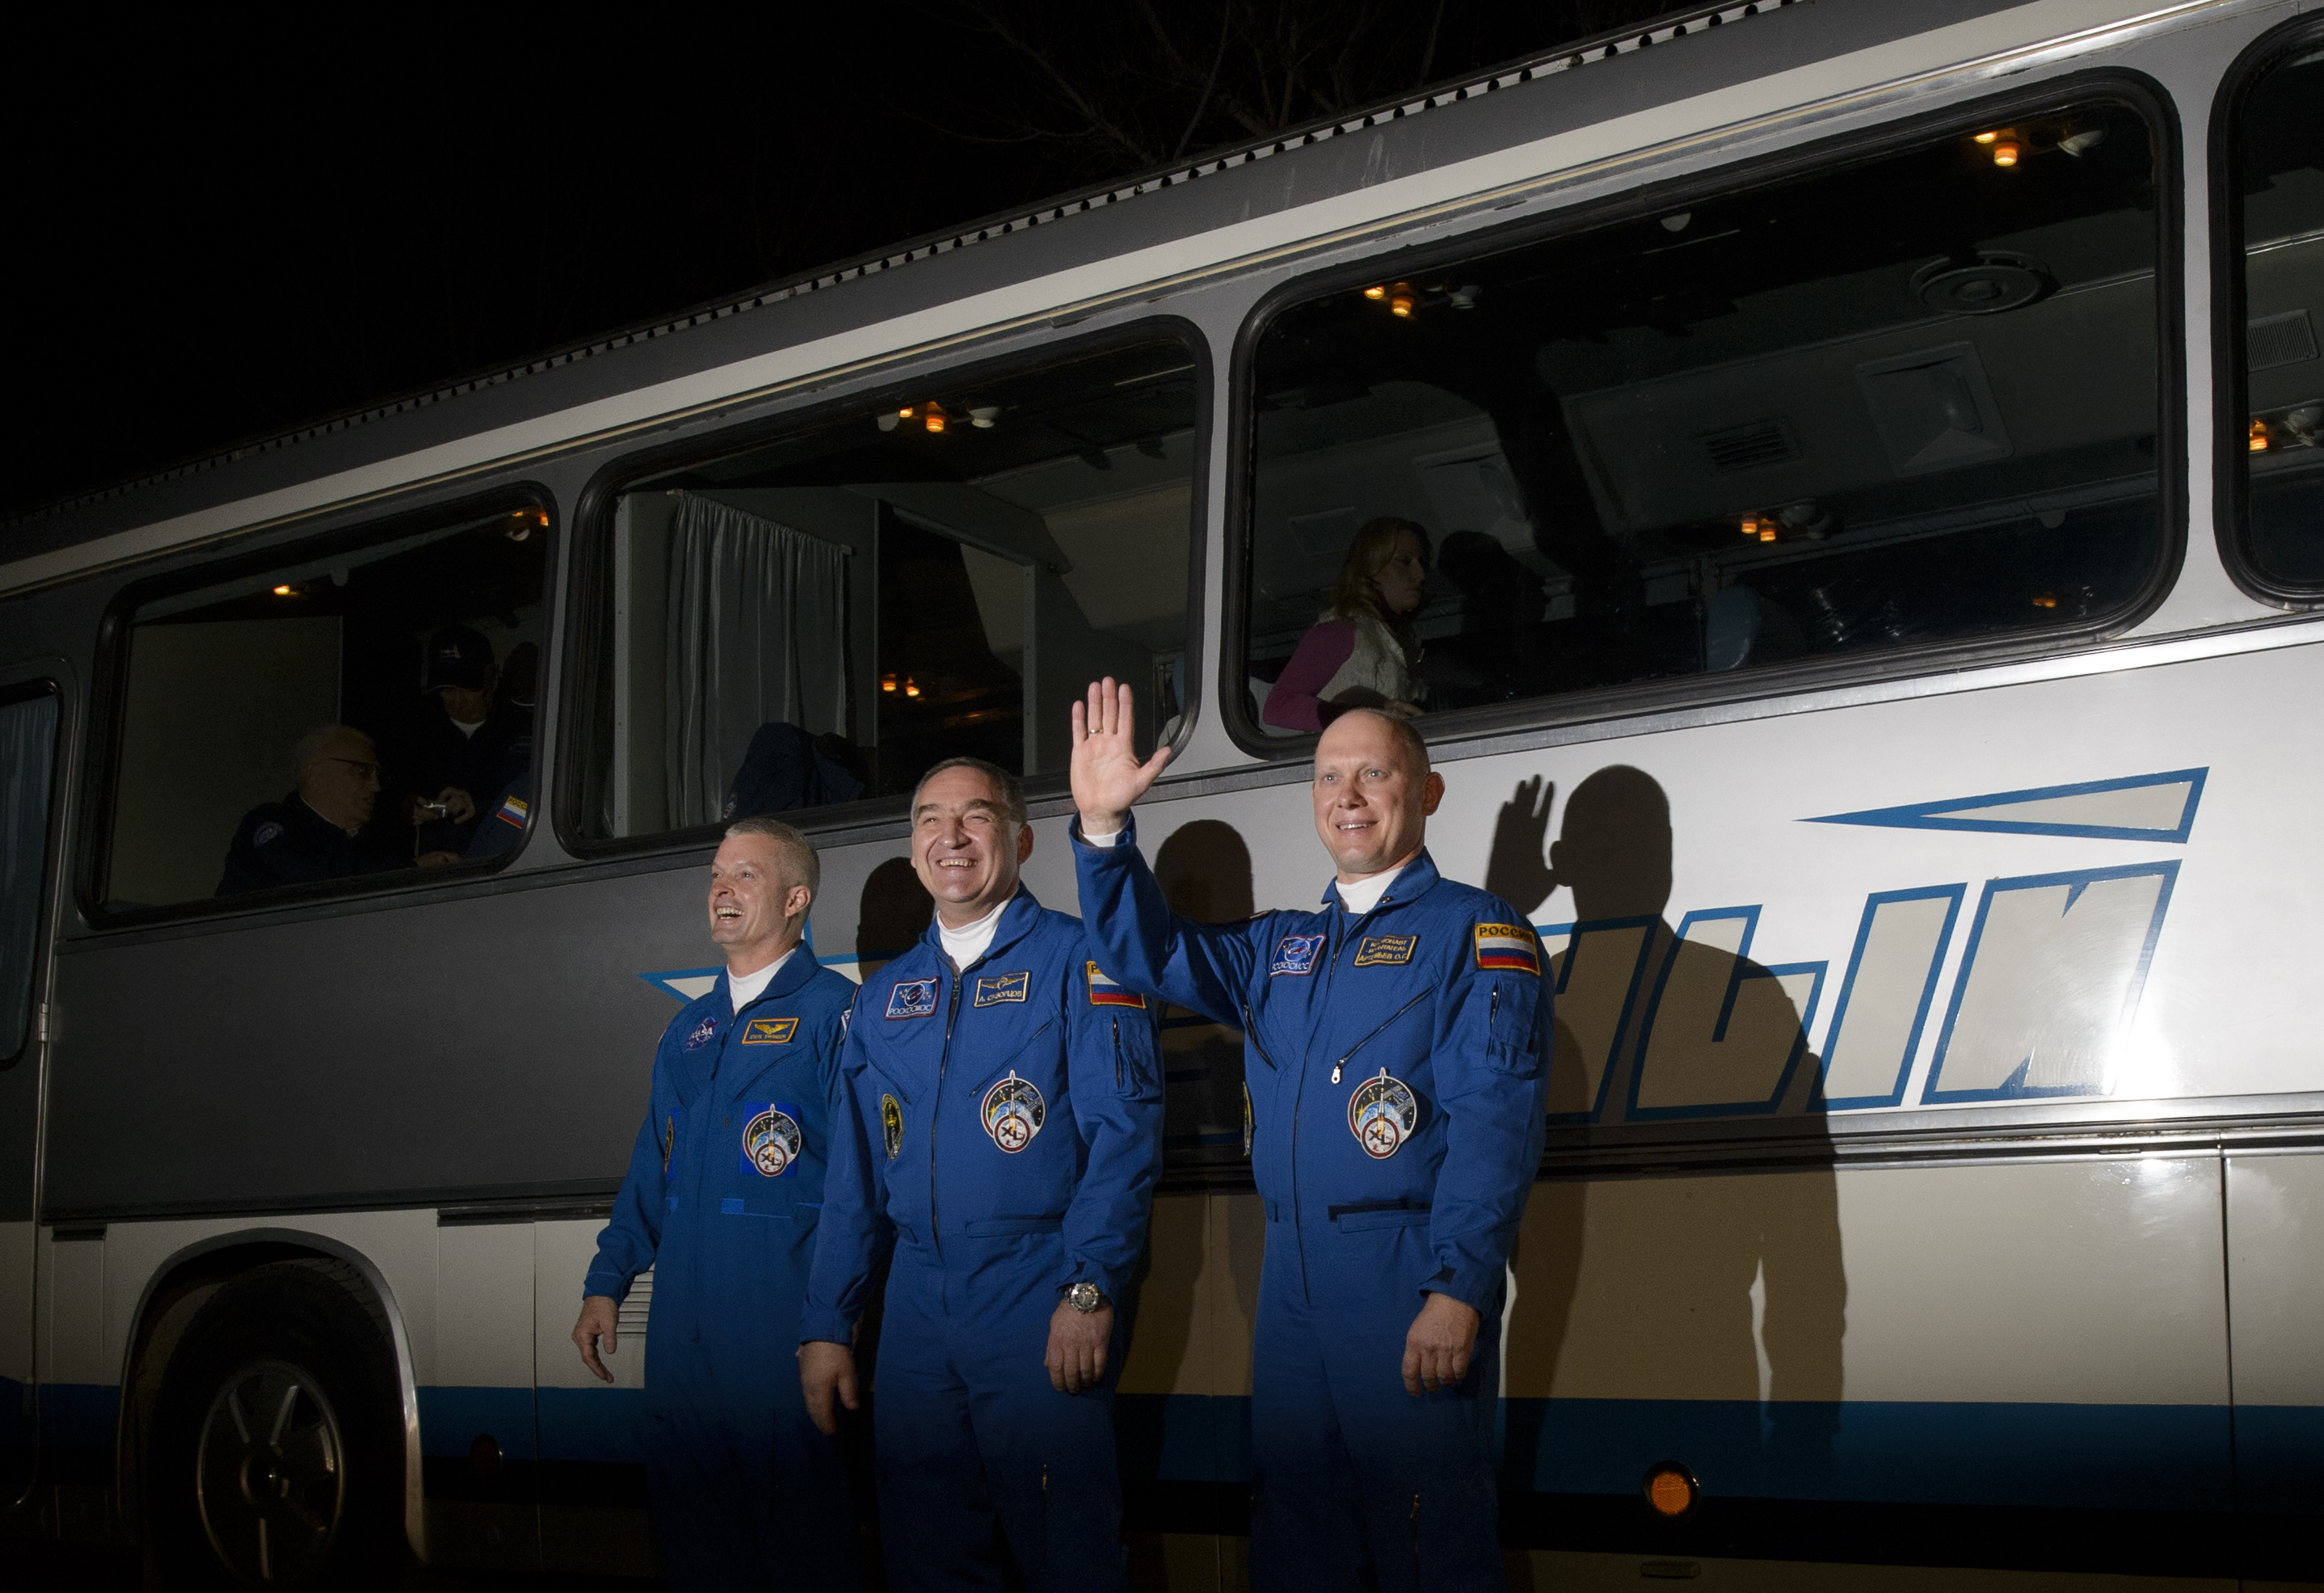 American astronaut Steve Swanson, left, and cosmonauts Alexander Skvortsov and Oleg Artemyev, are seen as they depart the Cosmonaut Hotel, Tuesday, March 25, 2014, in Baikonur, Kazakhstan, prior to their launch aboard a Soyuz rocket (NASA/Joel Kowsky &amp; Getty)